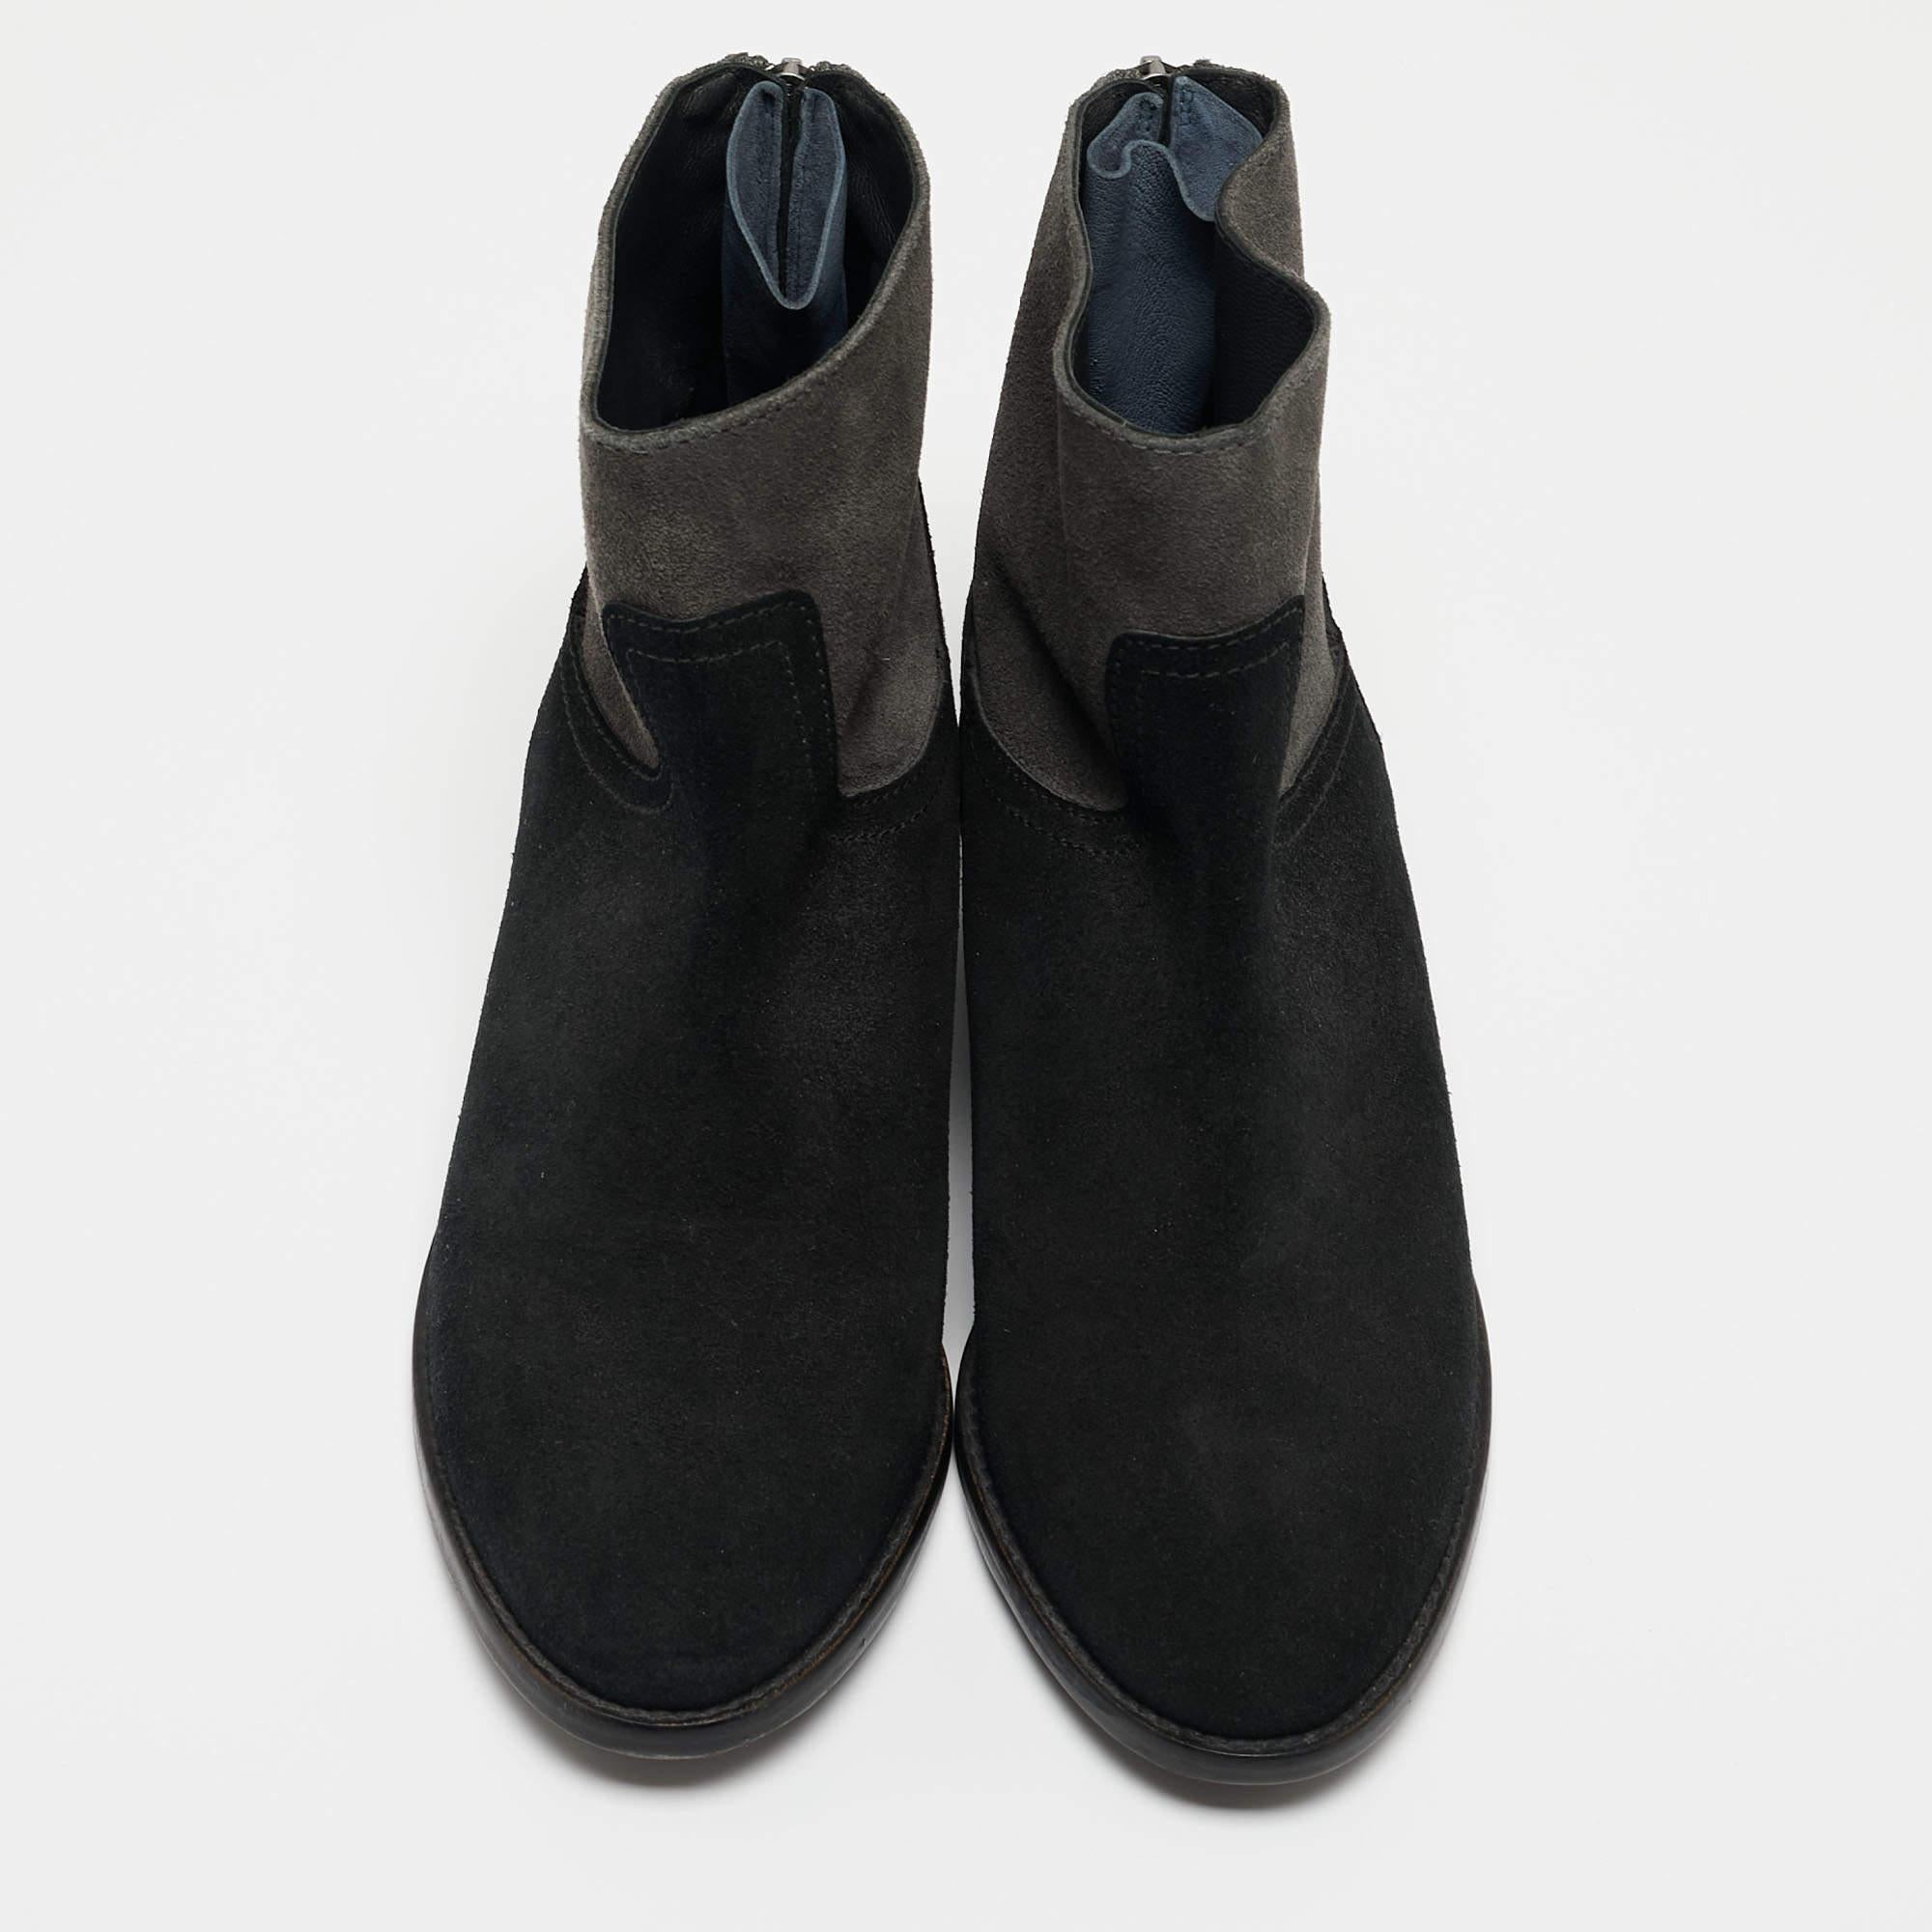 Complement your well-put-together outfit with these boots by Zadig & Voltaire. Minimal and classy, they have an amazing construction for enduring quality and comfortable fit.

Includes
Original Box